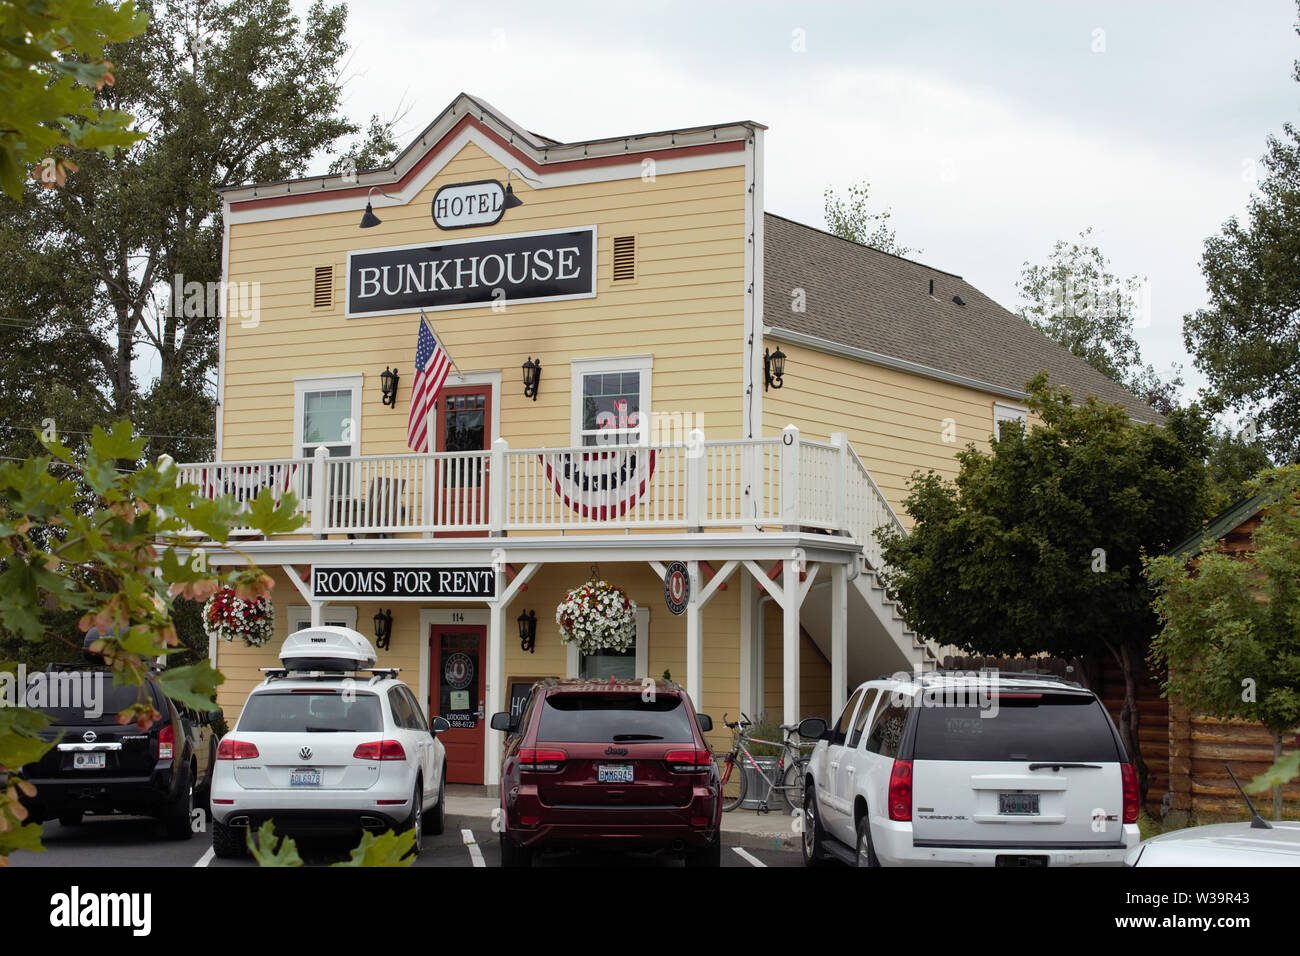 The Bunkhouse Hotel in the Central Oregon town of Sisters. Stock Photo